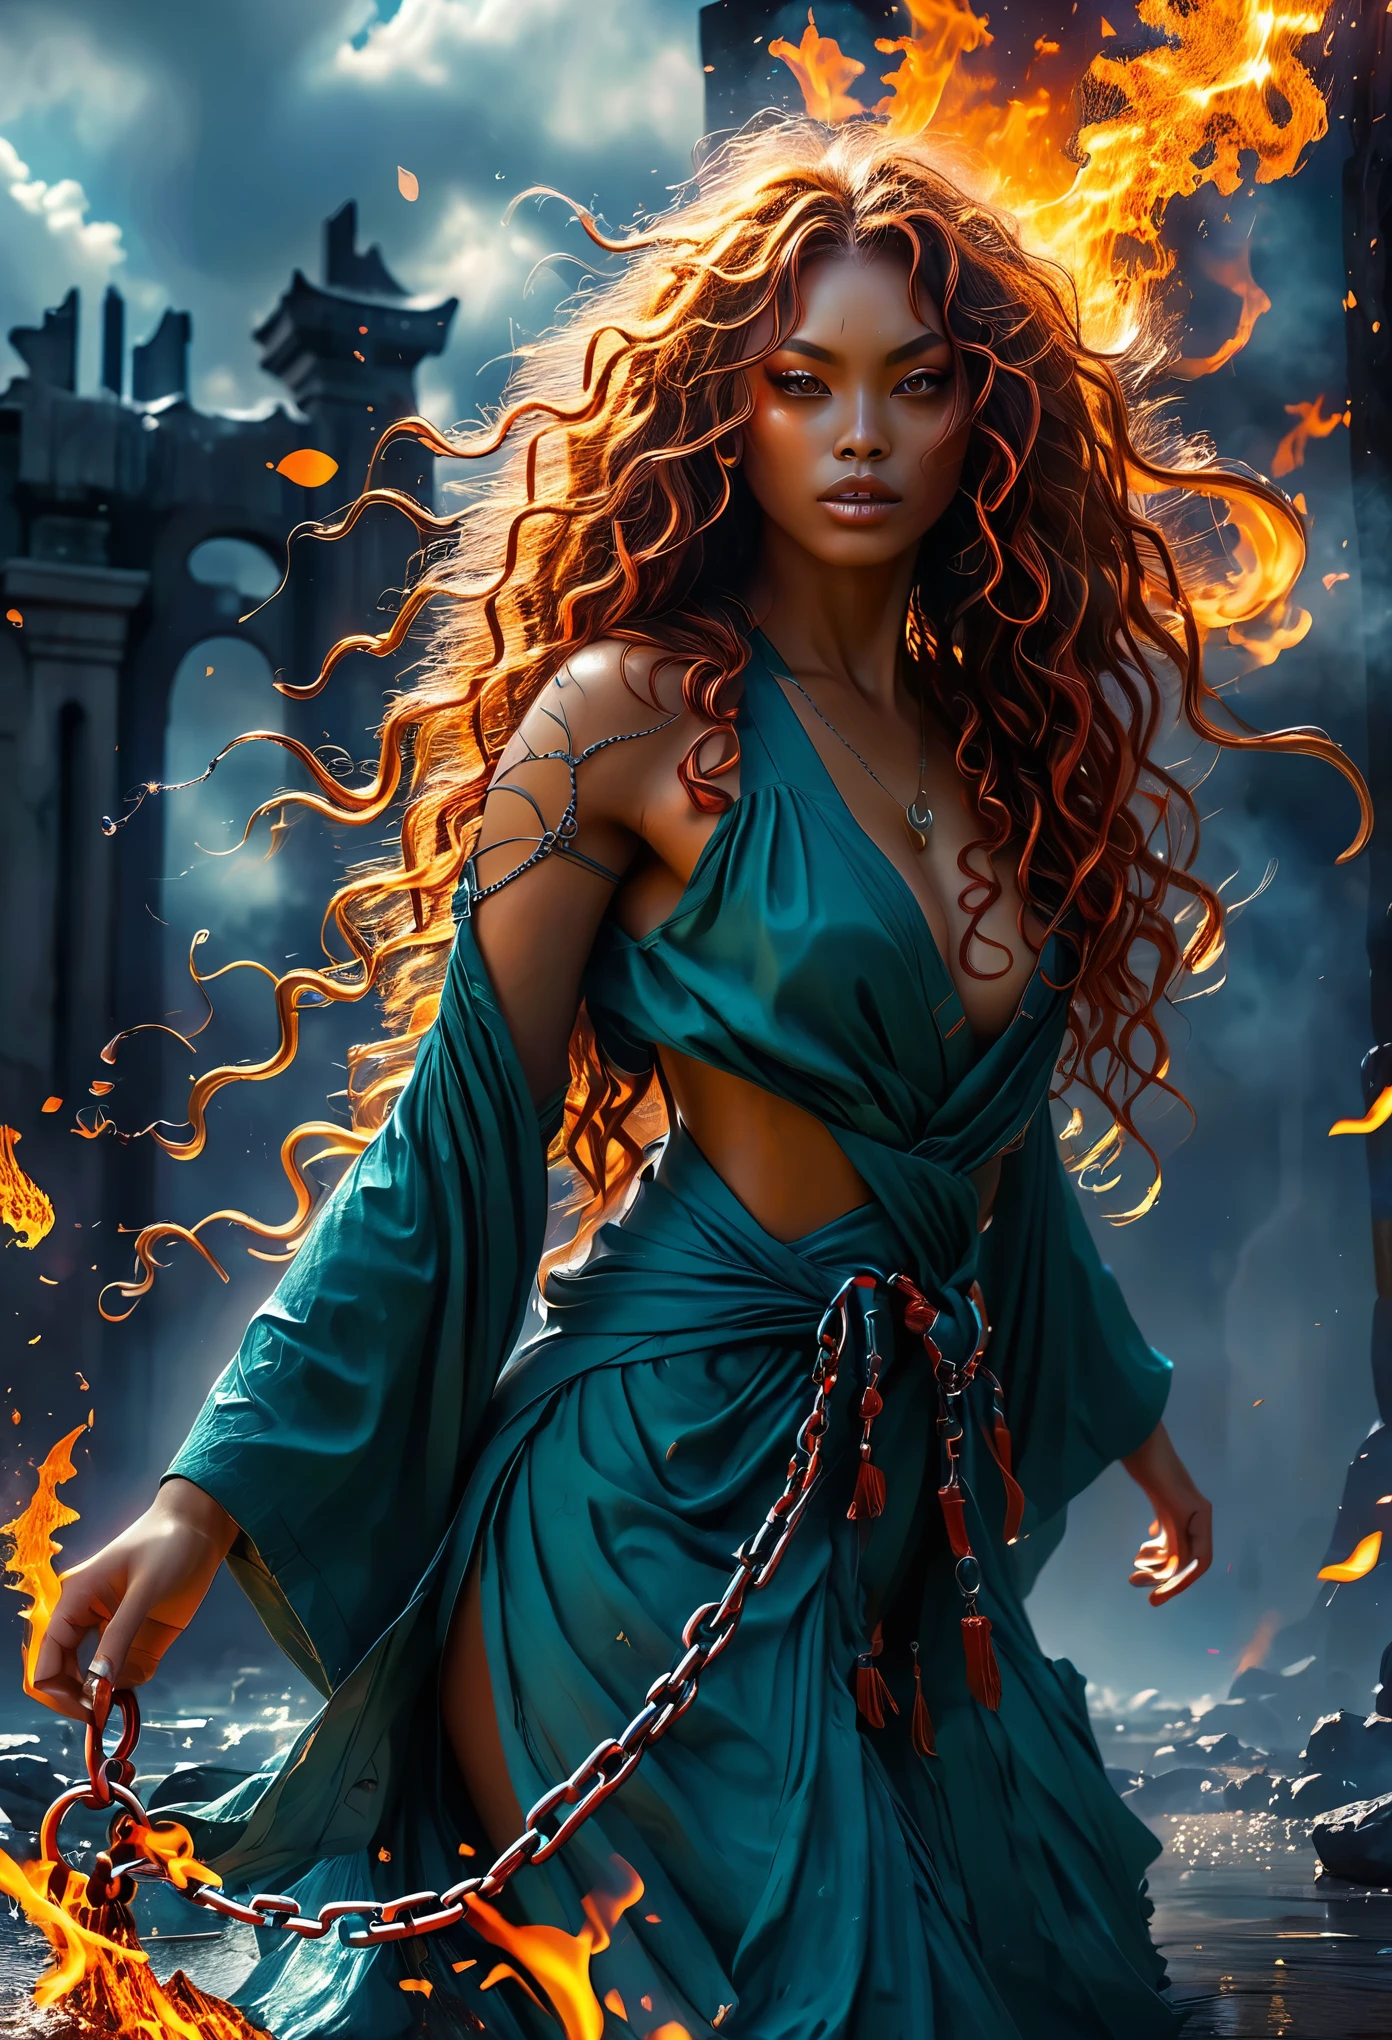 Novel in chaotic and destroy landscape, an brown skin woman with long ginger curly hair, very beautiful 18's woman, chained and wrapped in burning chains, wearing a long red kimono, metallic texture, demonic, wielding immense power, melting chains, scorching heat,rays of light piercing through the cracks,ominous shadows,exquisite detailing,steaming heat waves,smoke rising,,fireworks-like sparks,dramatic composition,dark fantasy,emerald flames,burning tattoos,fiery destruction,apocalyptic scene,crumbling ruins,distant flames,molten lava,unstoppable force,battlefield devastation,constantly growing in size,threatening clouds looming above,crimson danger,indomitable spirit,enchanted chains,,stunningly beautiful,demonic transformation,transcendent power,untamed chaos, 8K, Extremely detailed, (high quality, Realistic, photoRealistic: 1.37), tout le corps, ideal proportions and defined complexion, Meticulously designed features, inaccessible beauty, la perfection, chef artistique&#39;ouvrages d&#39;arts, vivid realism, sculptures hyper detailedes, formes Realistics, vraiment impressionnant, Un savoir-faire impeccable, pure shine, ethereal beauty, Delicate contours, Poses frappantes, sublime beauty, nuances subtiles, compositions dynamiques, couleurs vives, Perfect lighting, Expressions en mouvement, Celestial aura, Majestic presence, Ambiance onirique, rendu d&#39;octane detailed inégalé, tendance sur artstation, Photographie artistique 8k, photoRealistic concept art, Naturel, doux, Volumetric cinematic perfect light, clair-obscur, Award-winning photography, chef-d&#39;ouvrages d&#39;art, huile sur toile, beau, detailed, complexe, incroyablement
